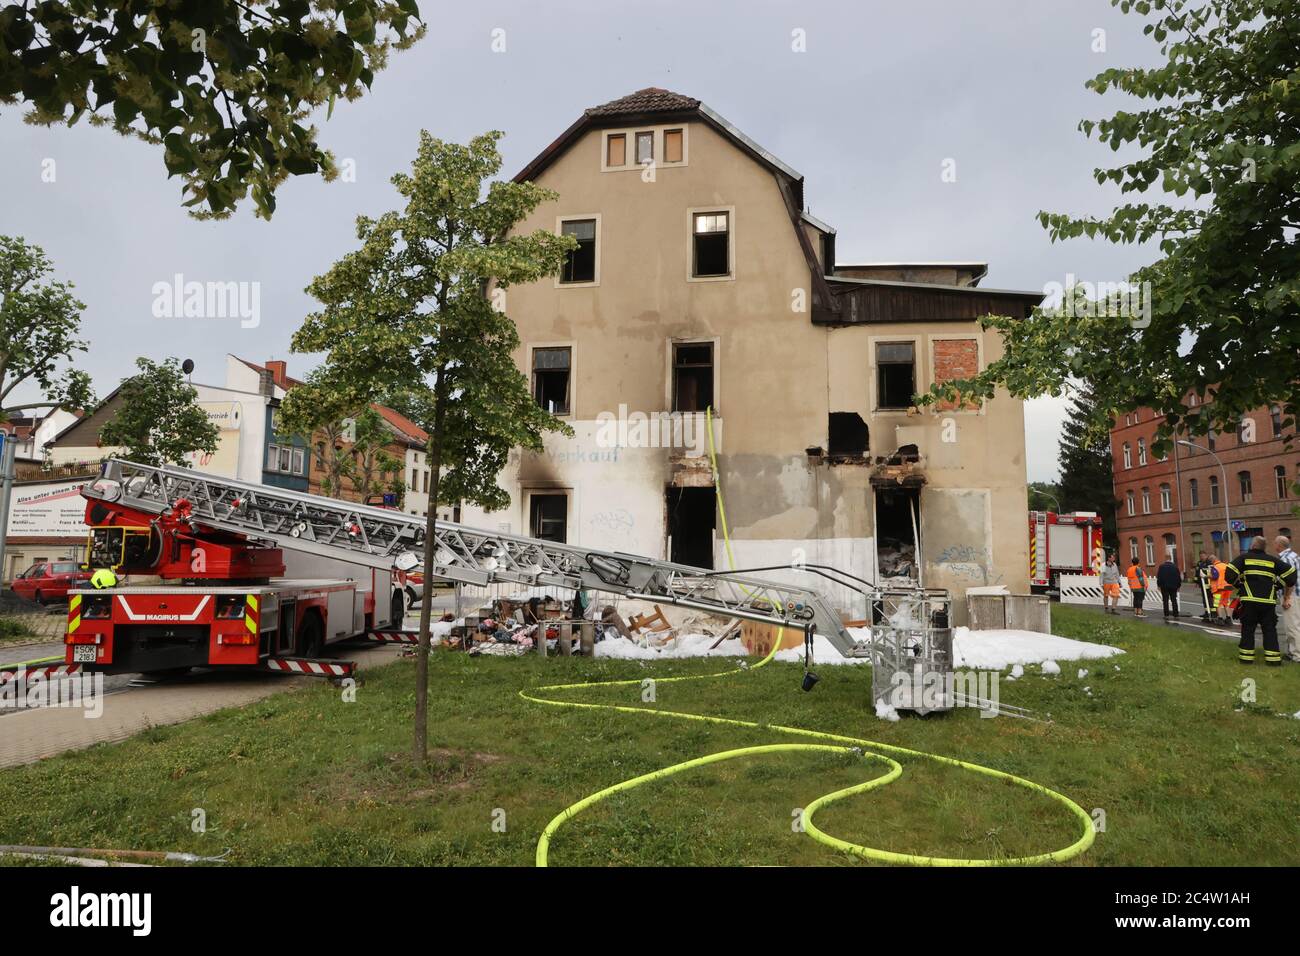 29 June 2020, Thuringia, Pößneck: Firefighters are standing by a house in the city centre. A fire had broken out here last night. Police are investigating the cause of the fire. According to first reports, no persons were injured. Photo: Bodo Schackow/dpa-Zentralbild/dpa Stock Photo